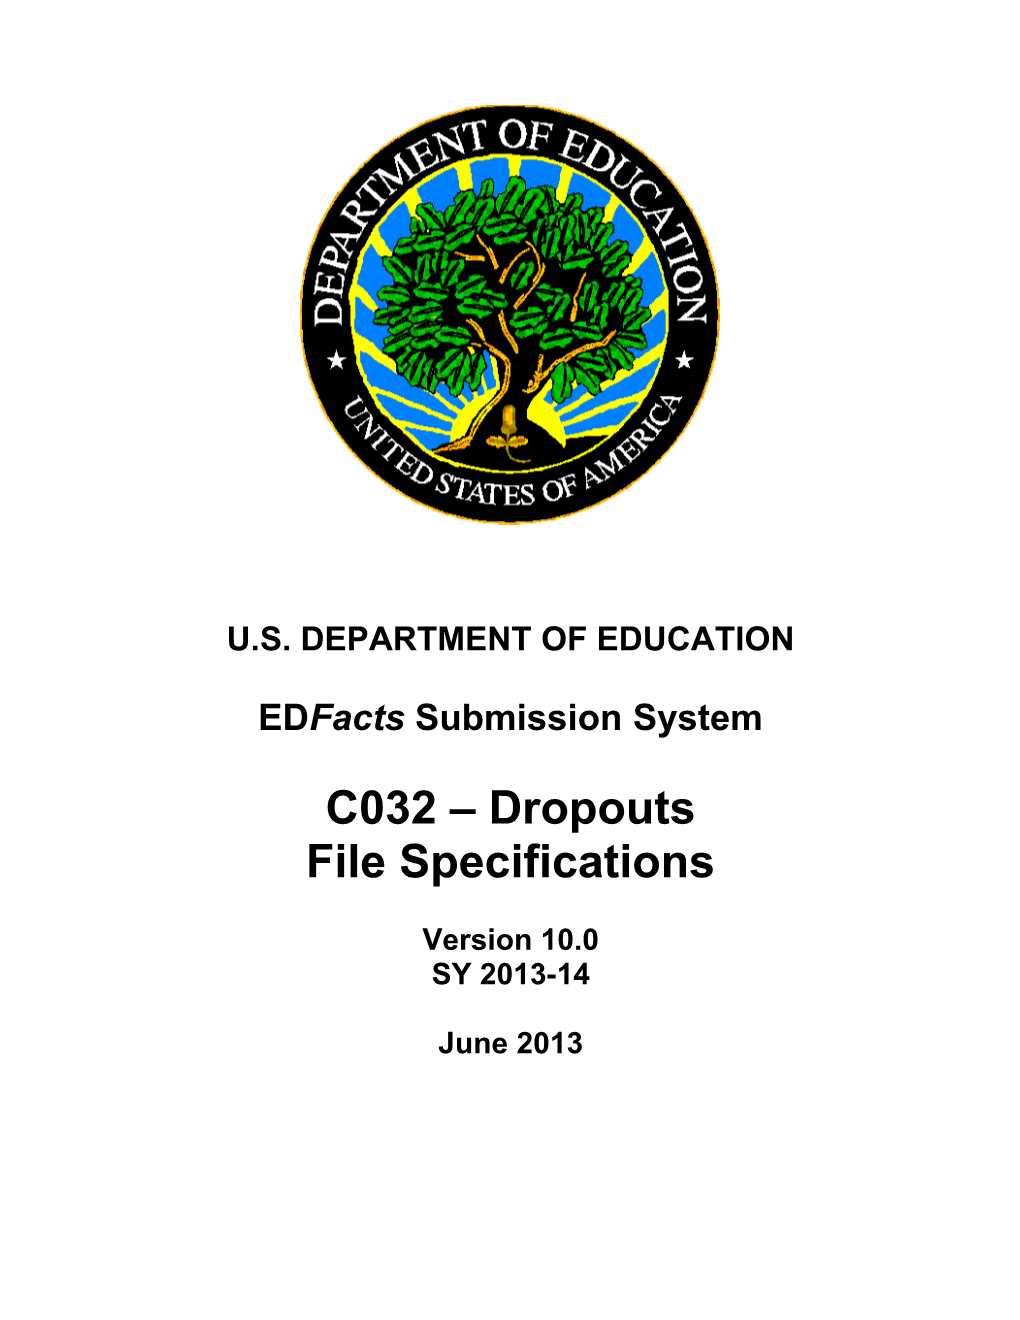 Dropouts File Specifications